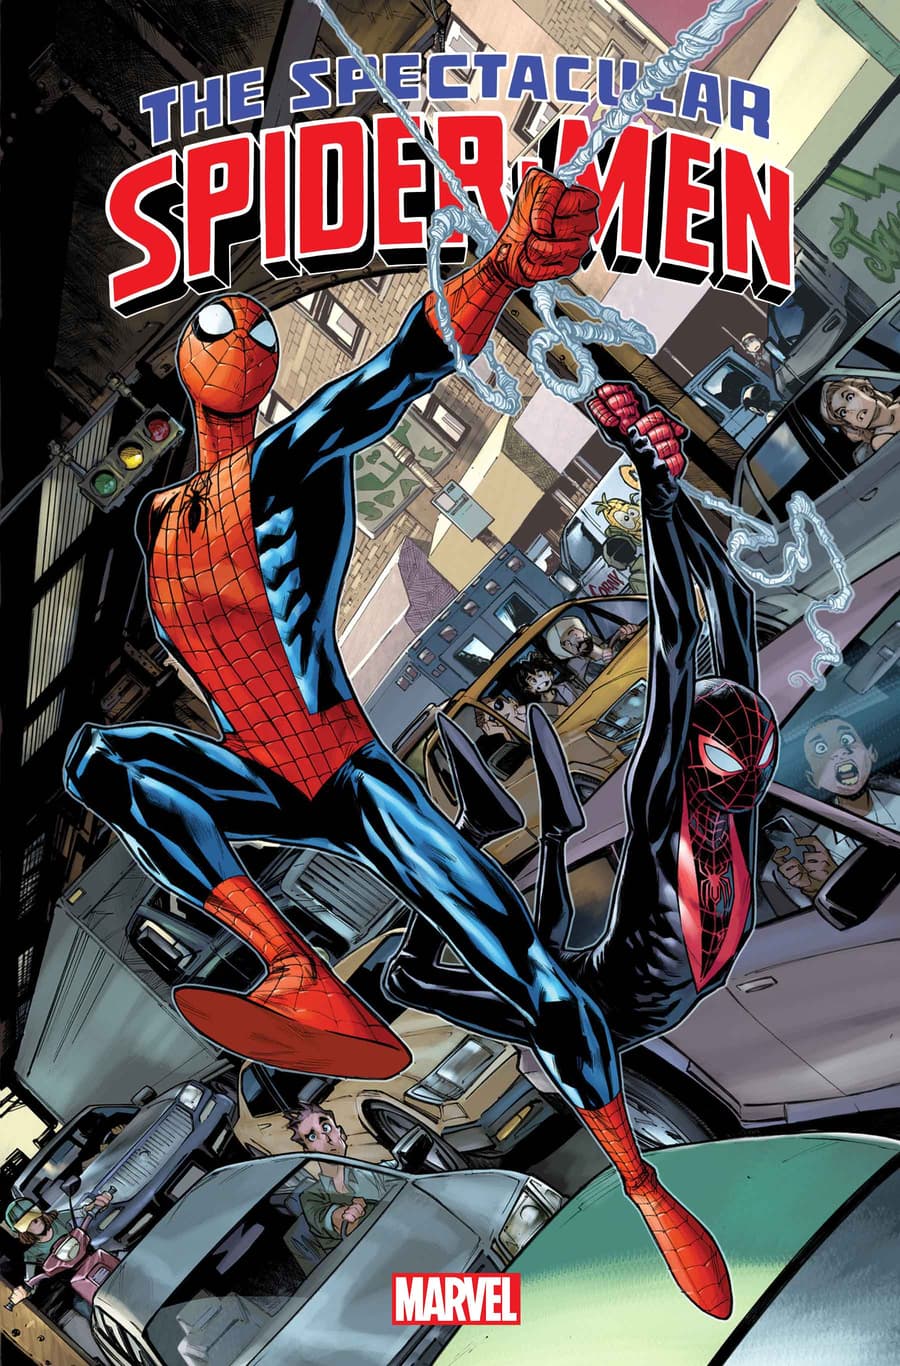 SPECTACULAR SPIDER-MEN #1 cover by Humberto Ramos